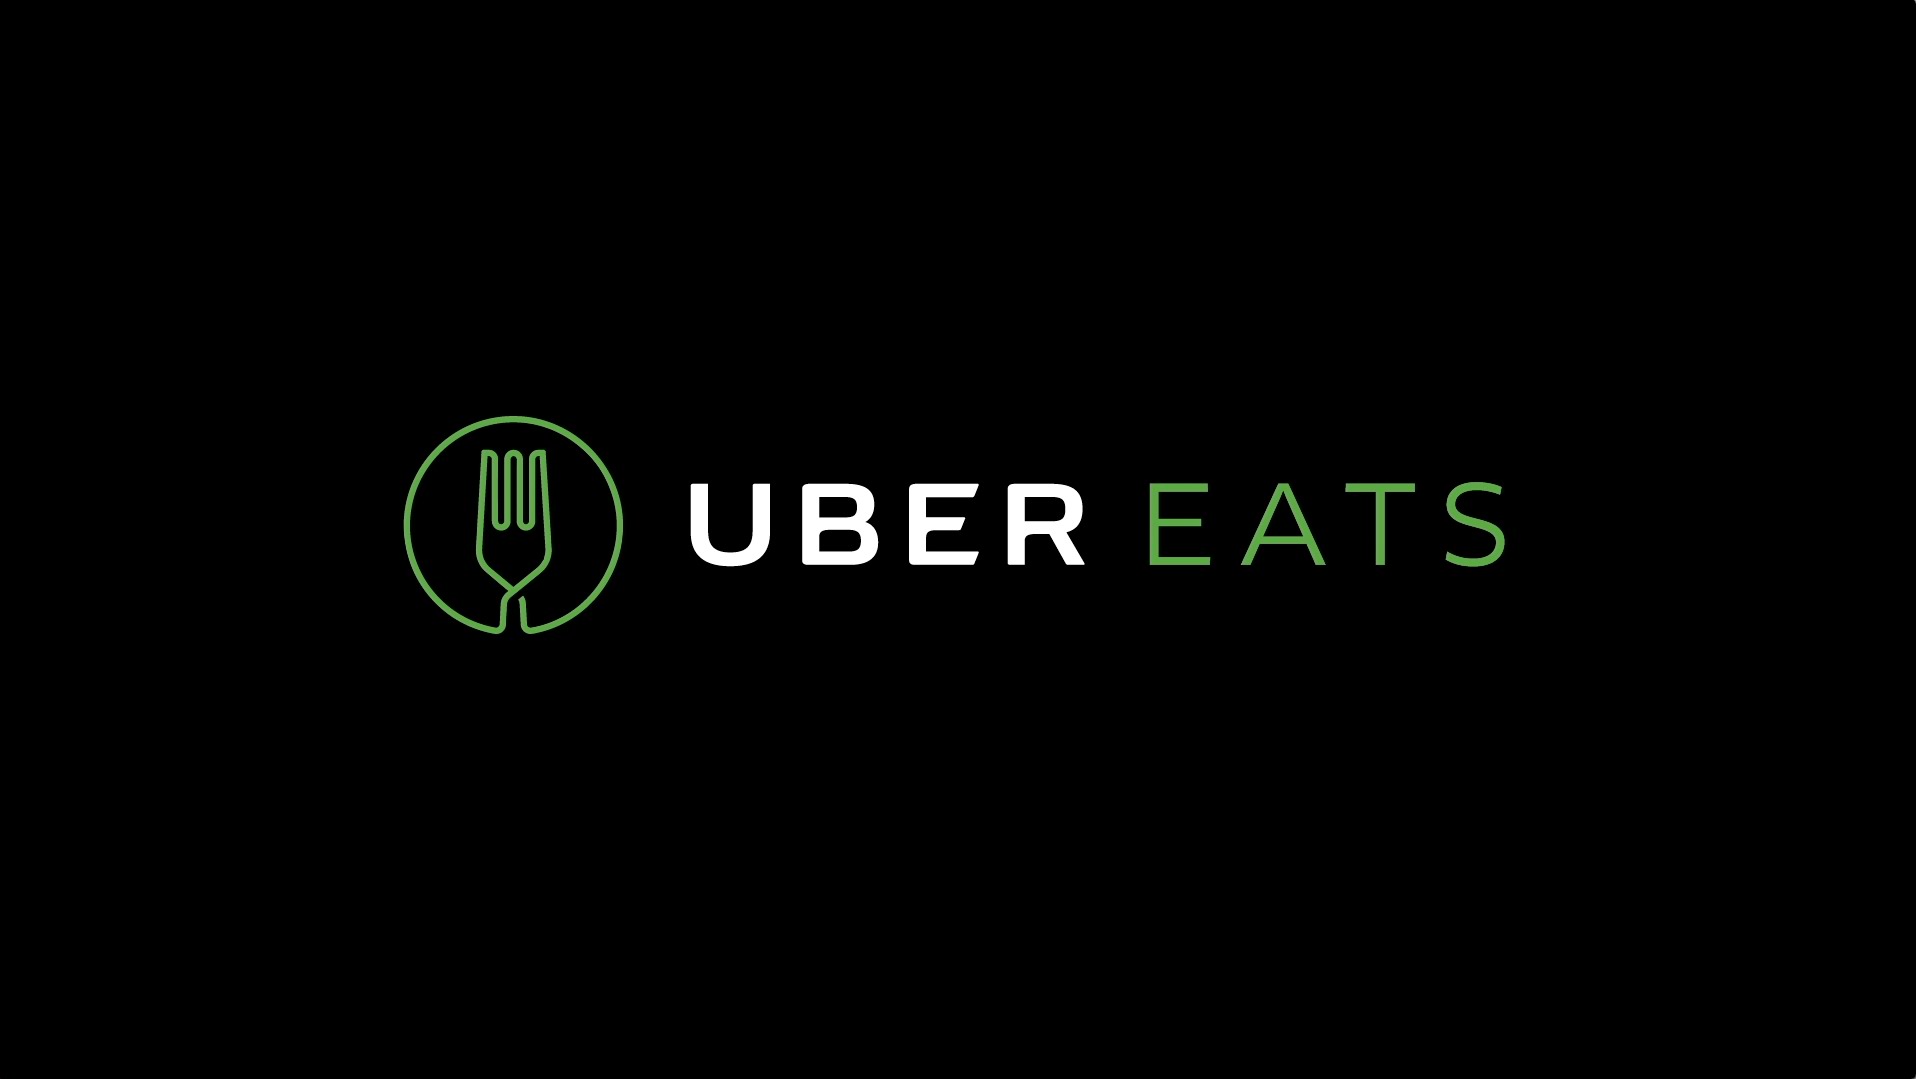 Food delivery service UberEATS launches in Kansas City